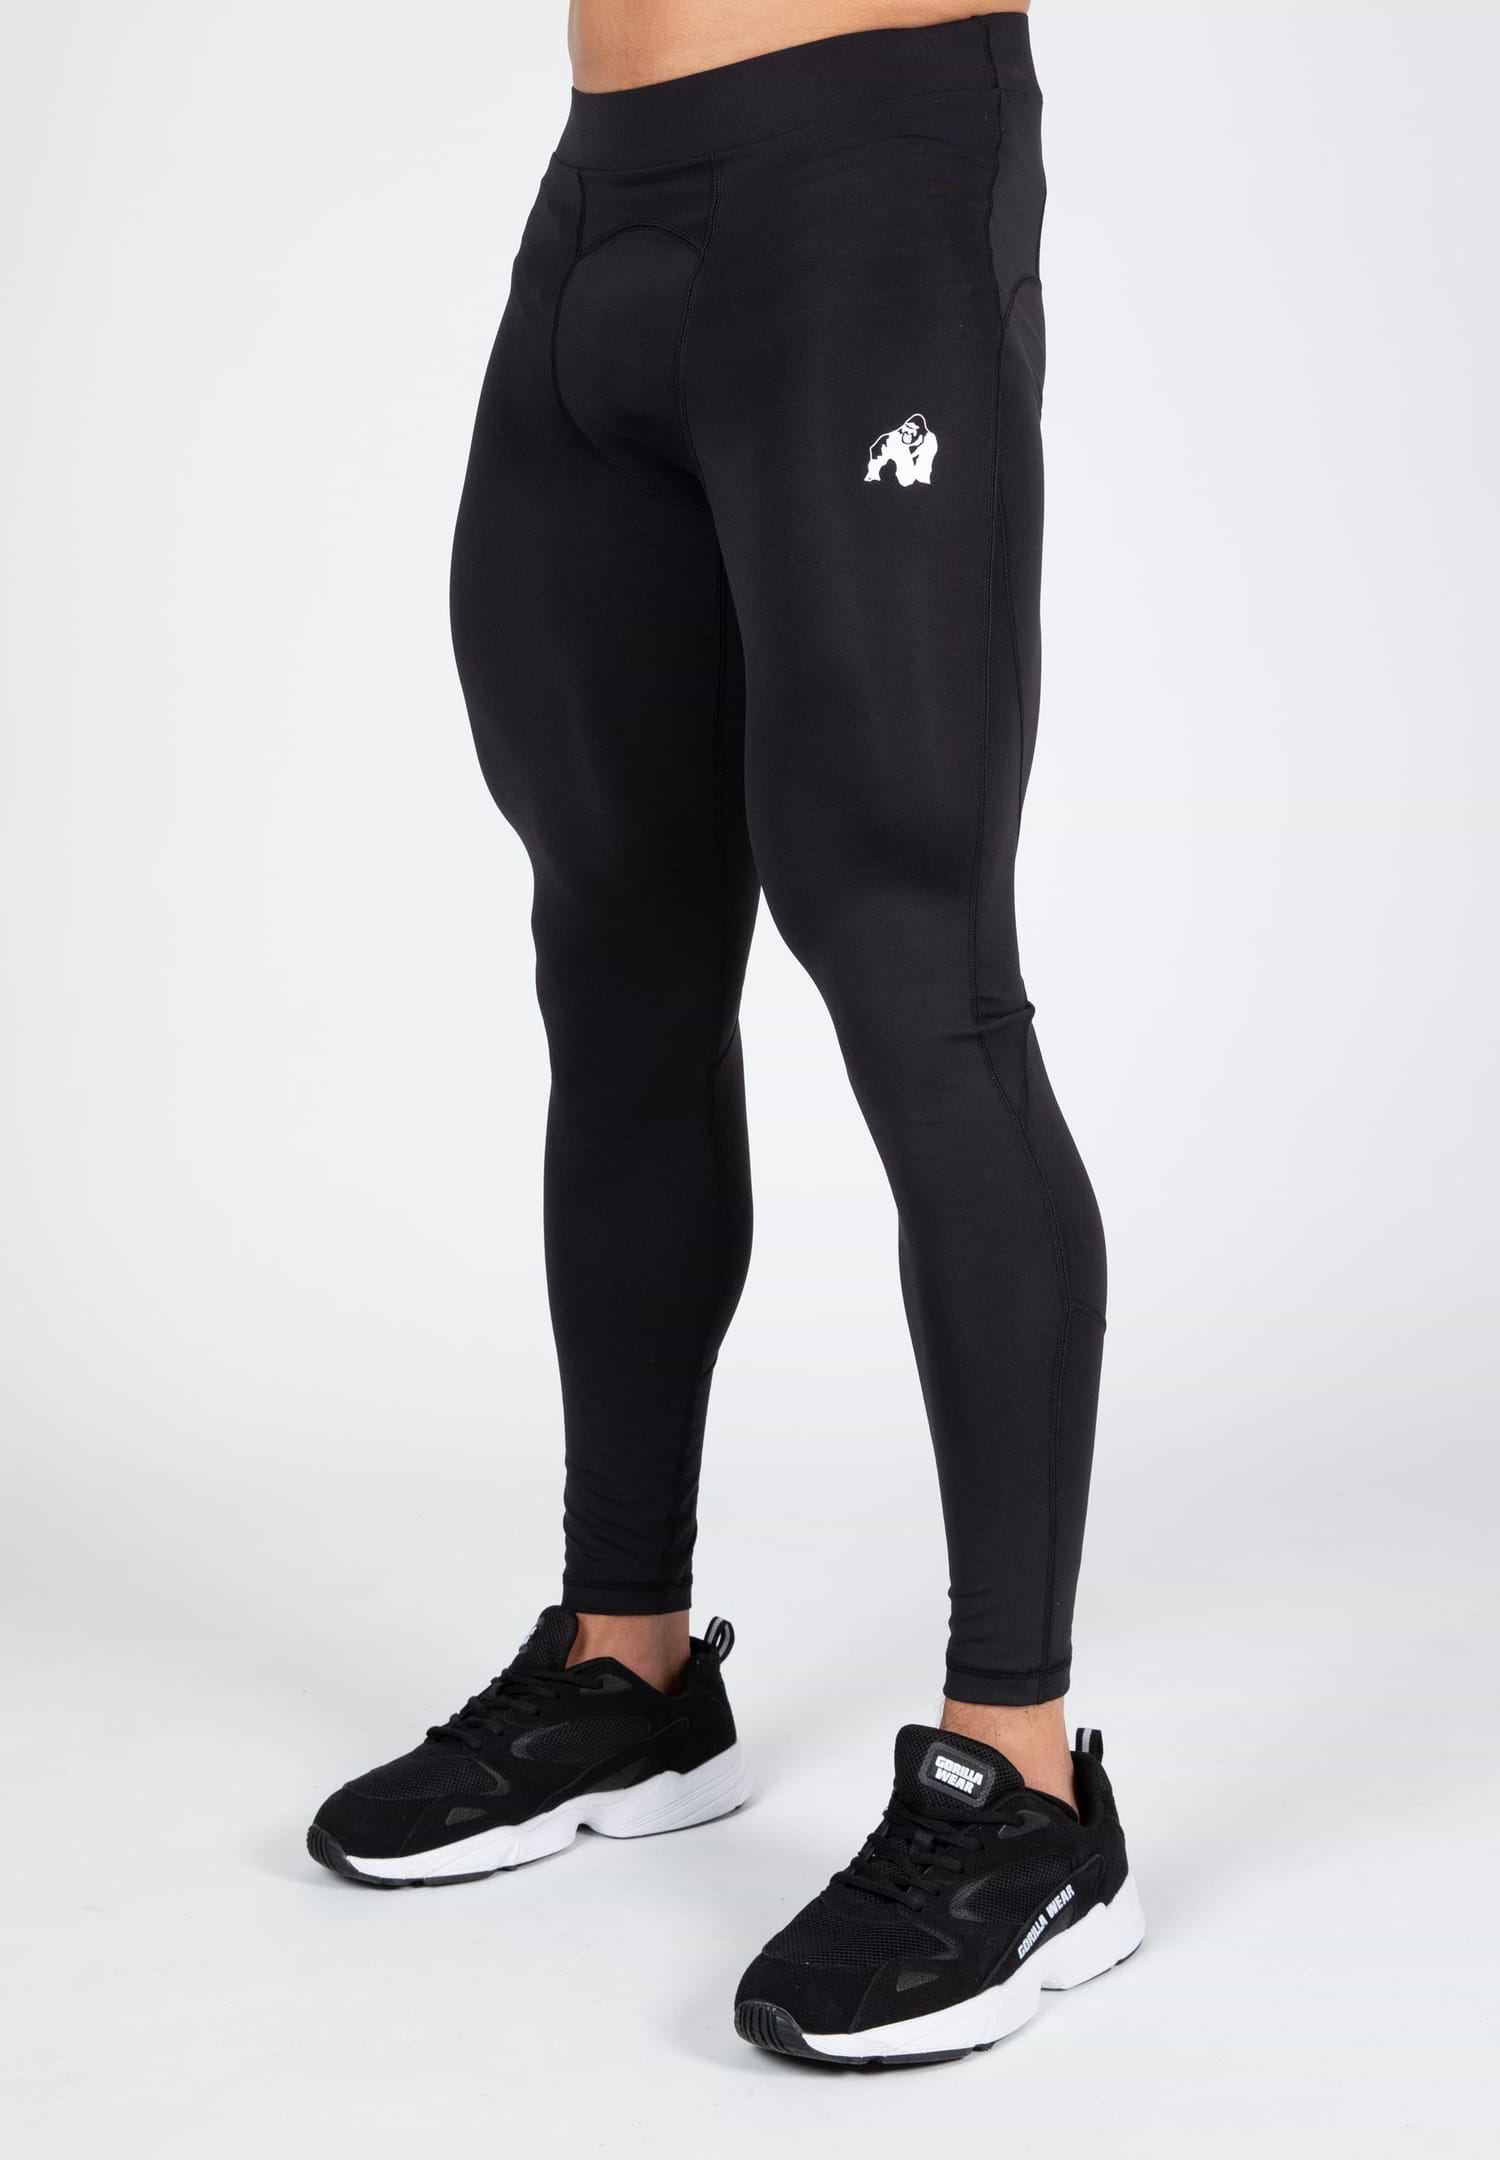 How tight should gym leggings be? How to wear leggings / House of peach